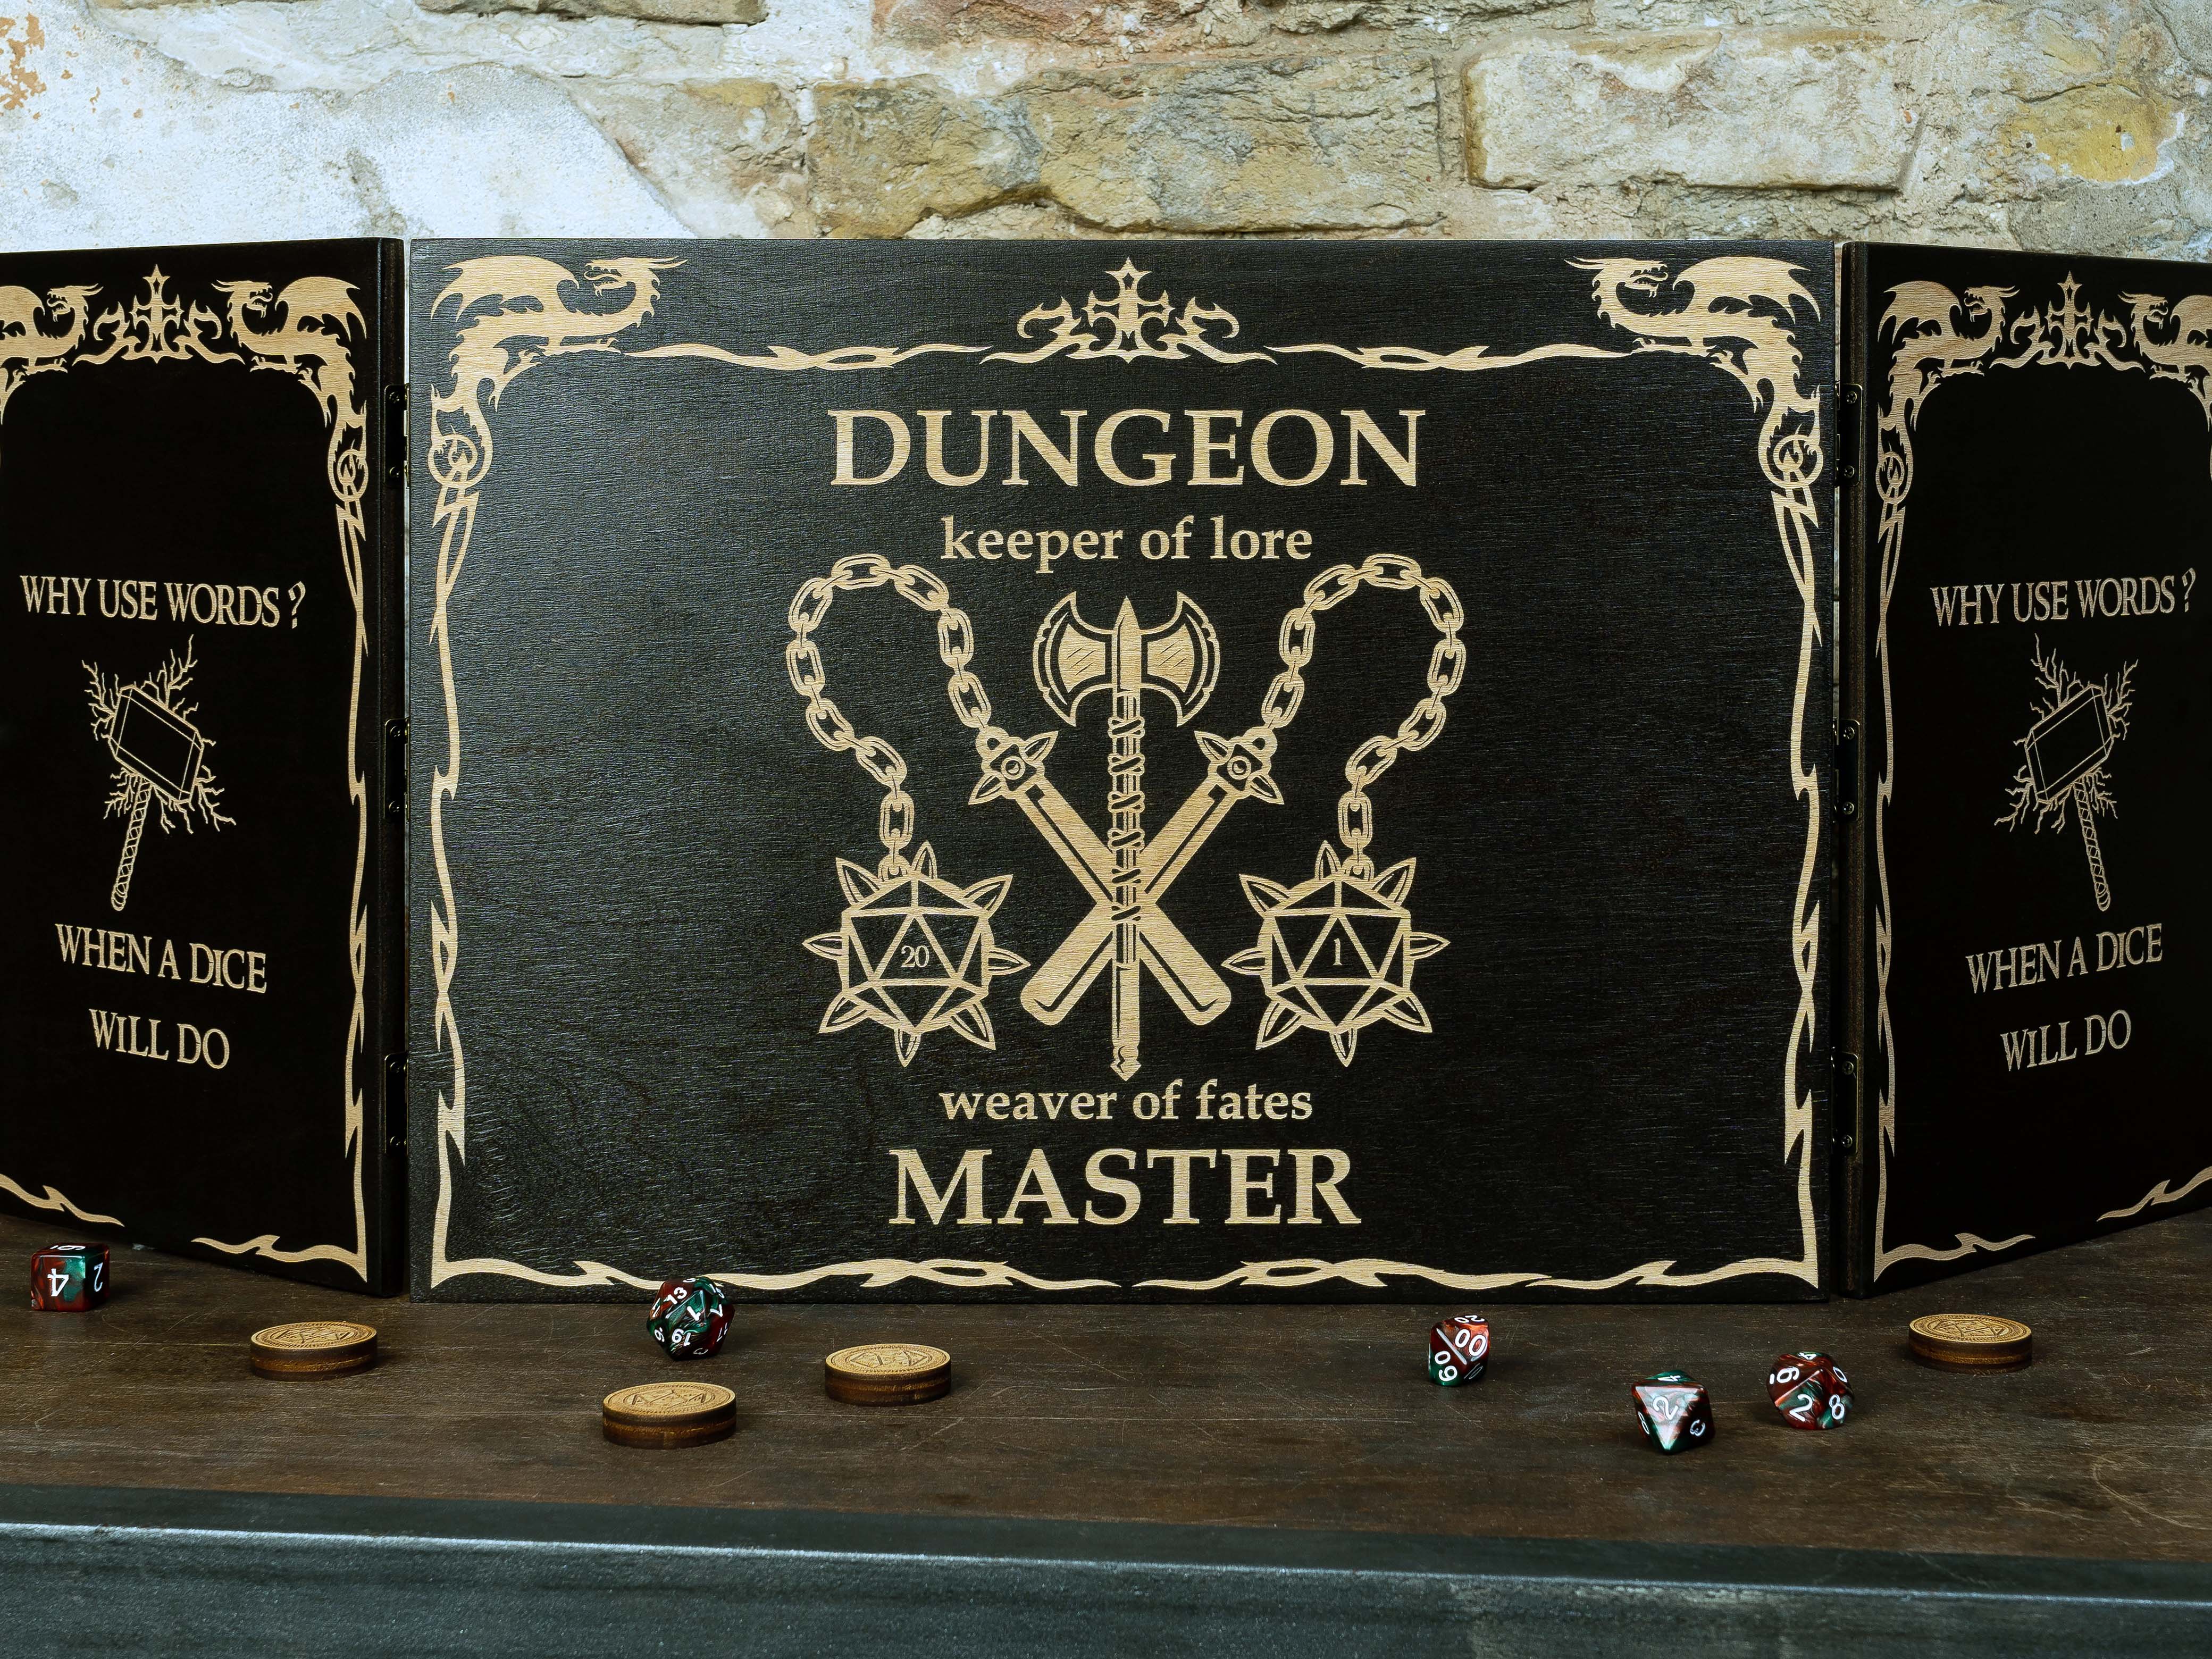 Dungeon Master wood screen "Keeper of Lore Weaver of fates", Dungeon master screens - GravisCup